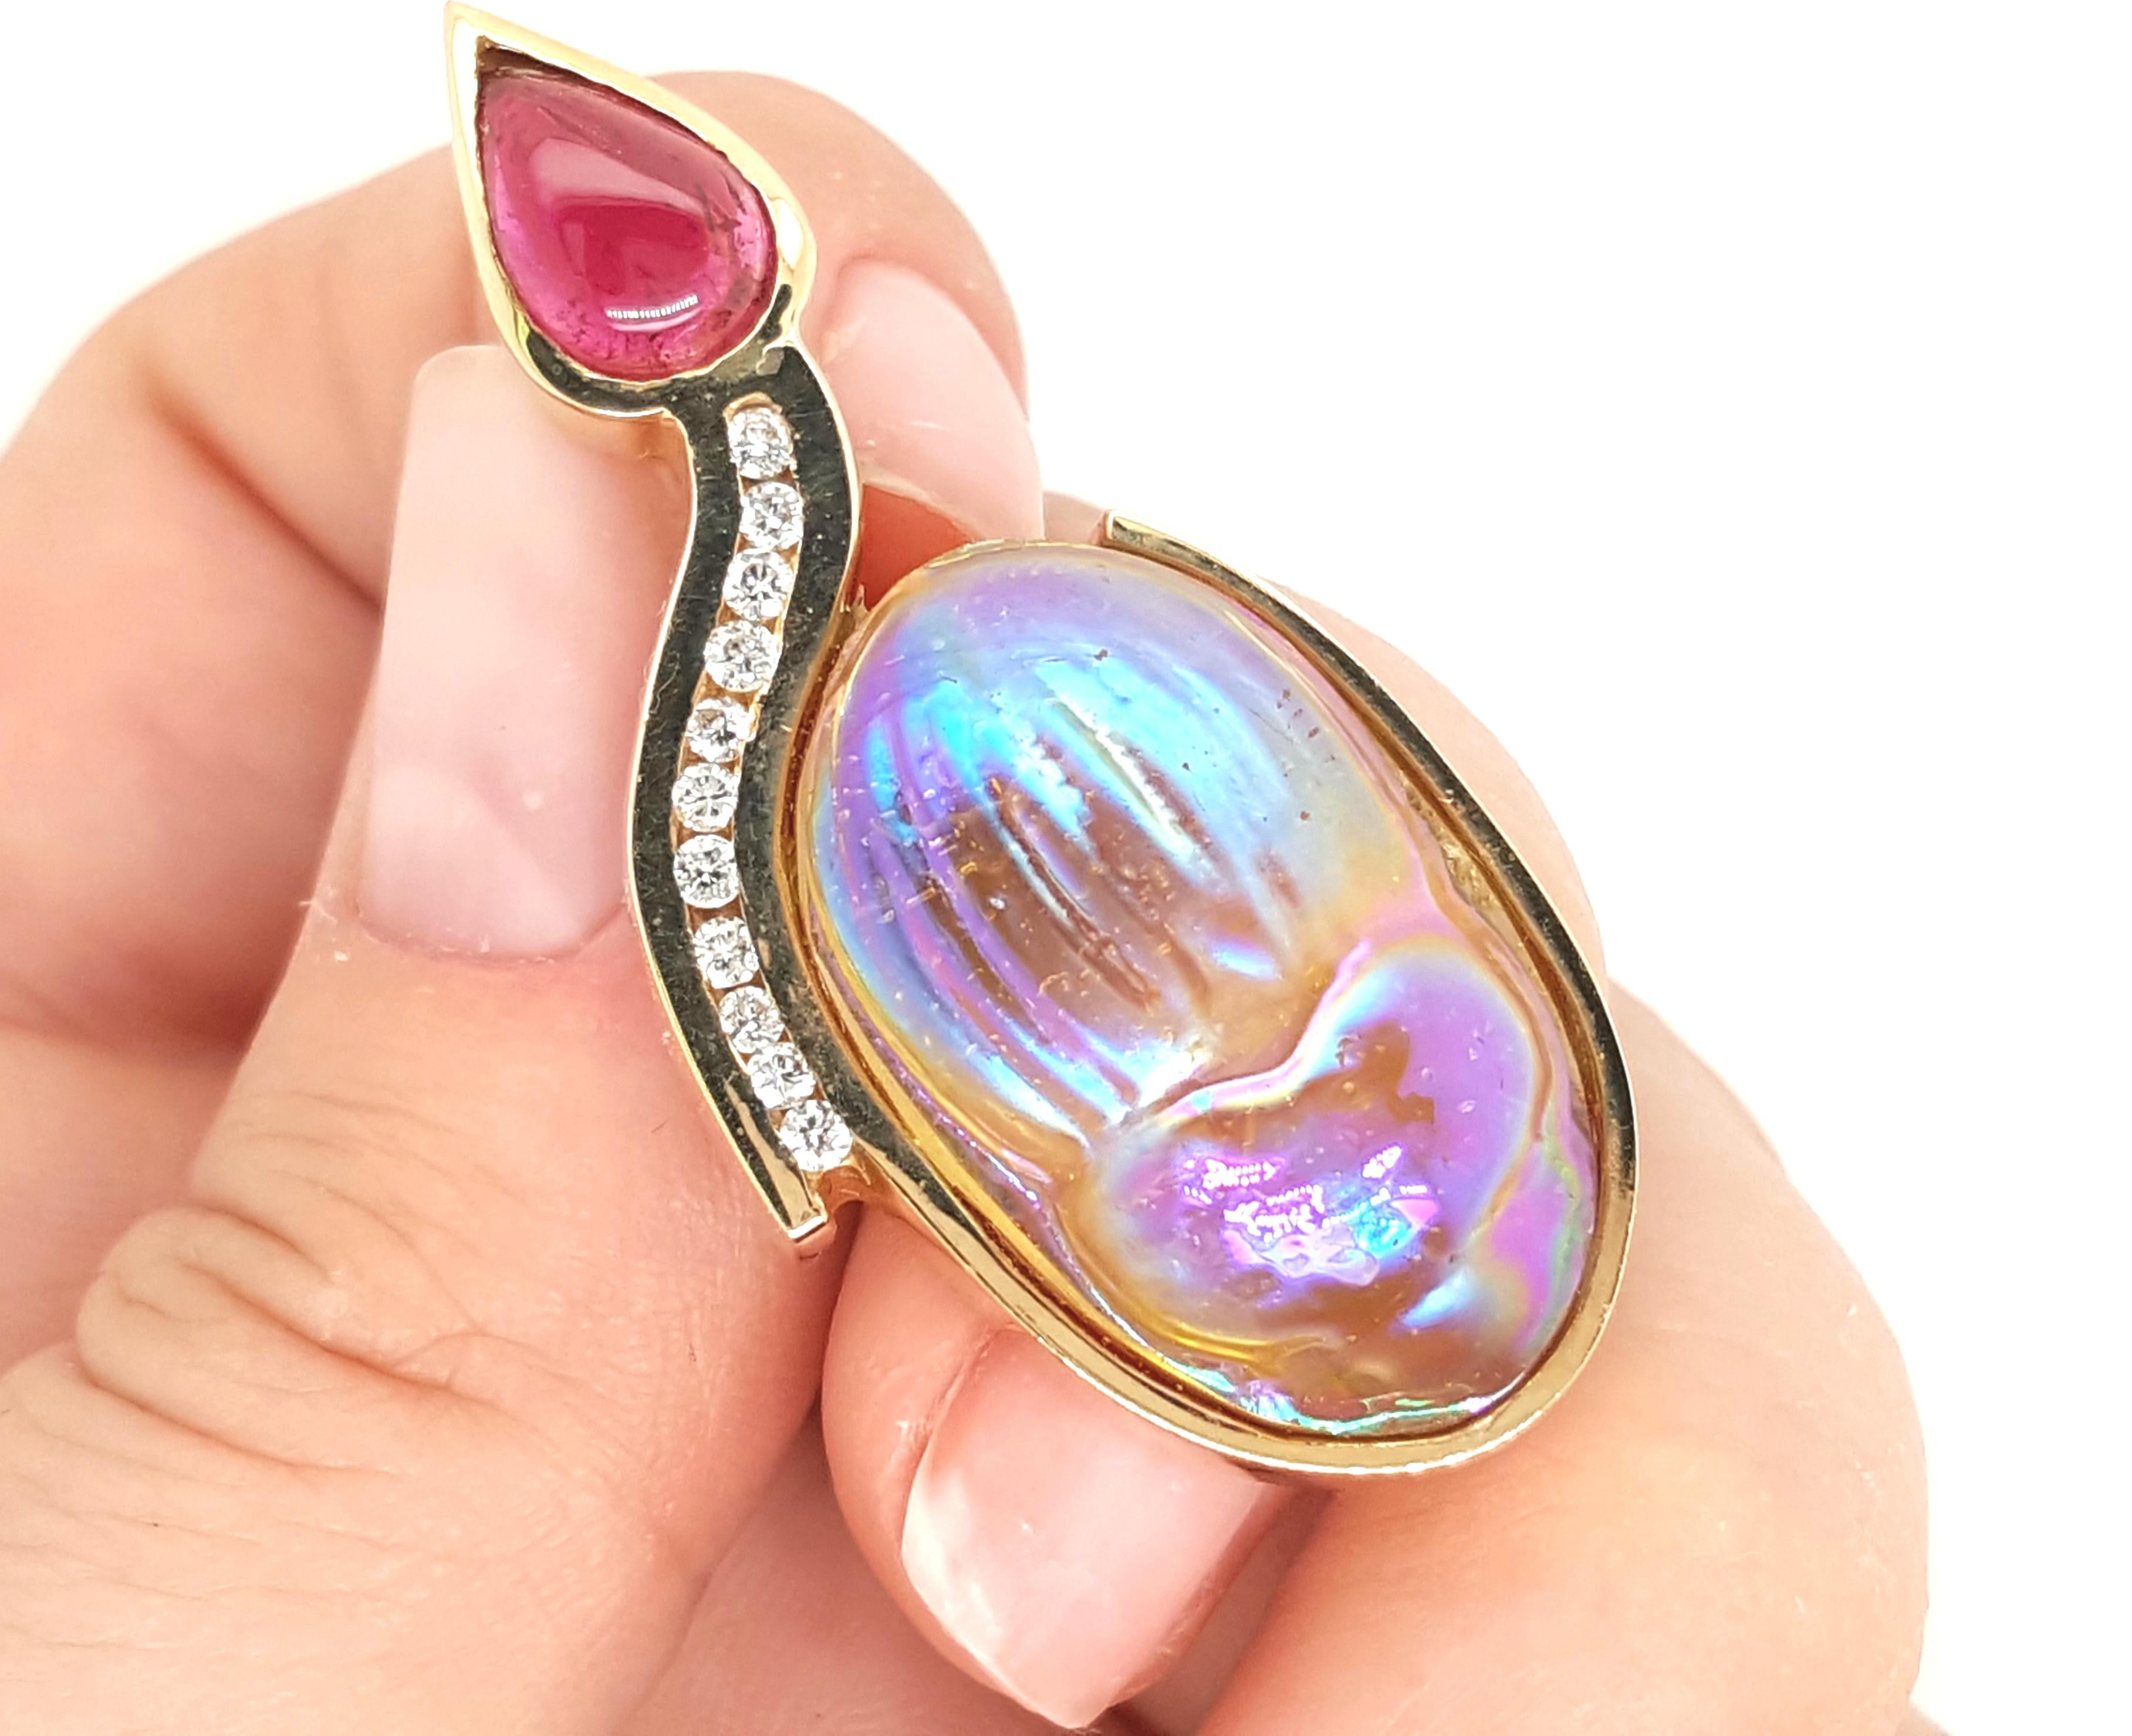 Contemporary Style 14K Yellow Gold Pink Tourmaline and Diamond Brooch.  This impressive brooch features a scarab, bezel set and accented by a pink pear shaped cabochon tourmaline and enhanced by channel set round brilliant cut diamonds. In Egypt the